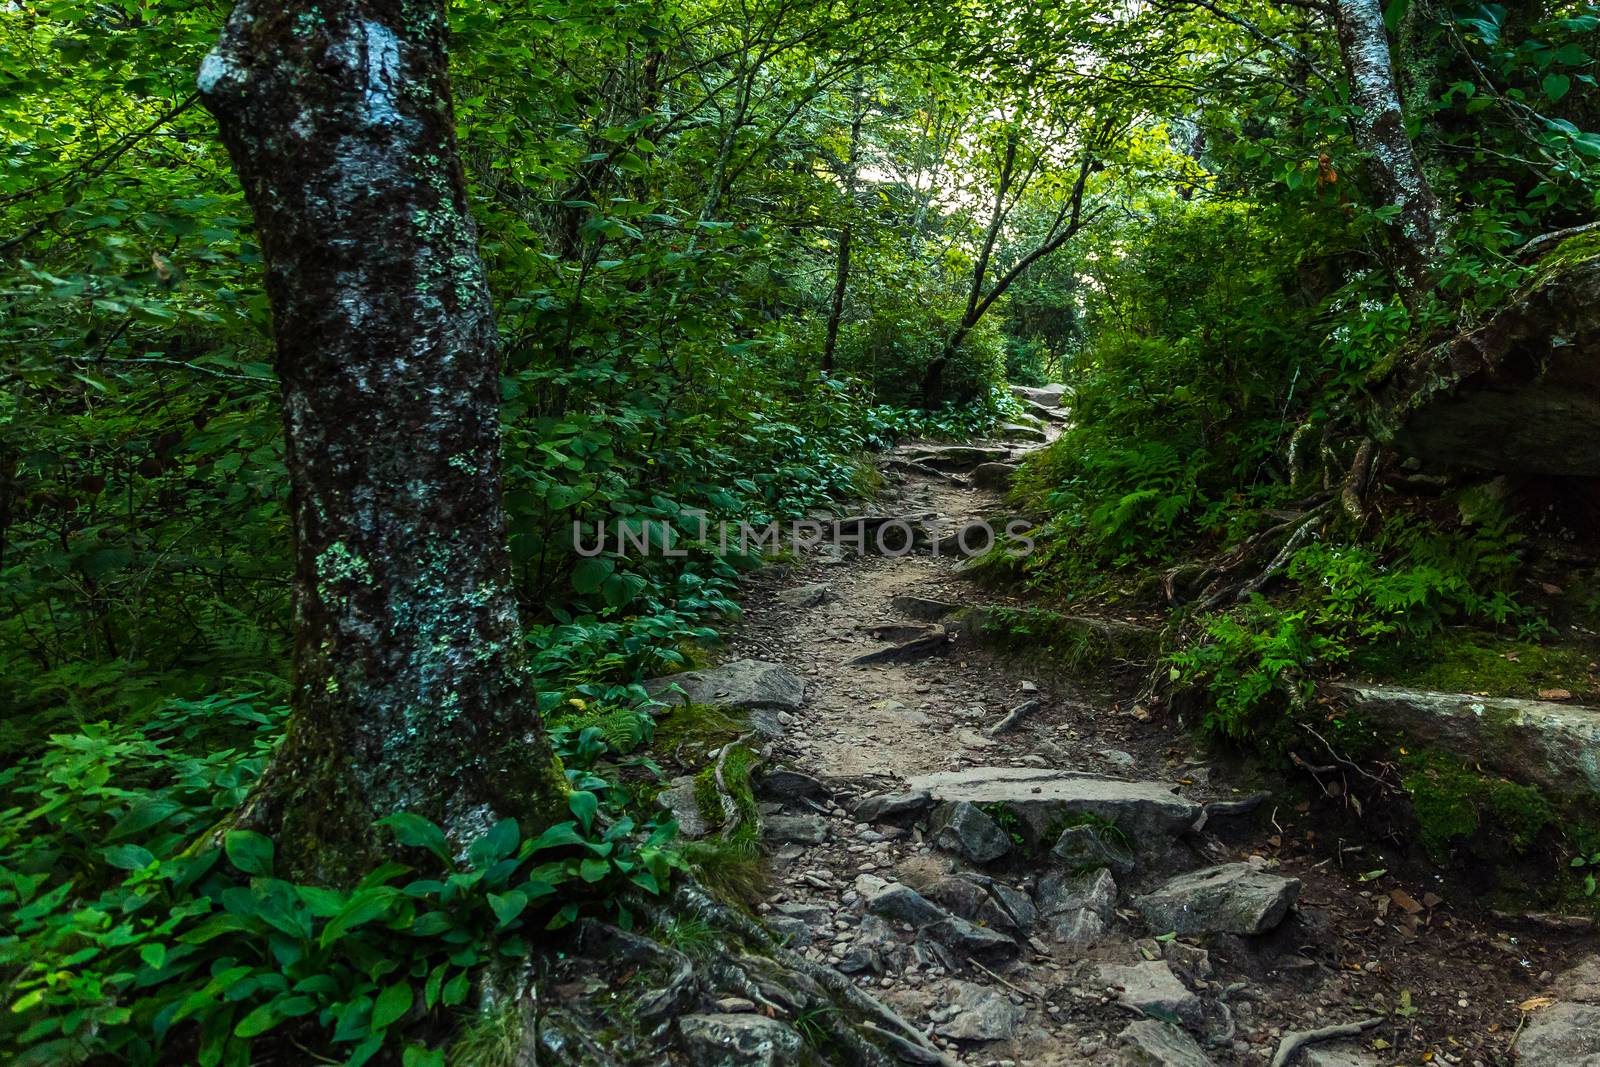 The Appalachian Trail as it crosses the Smoky Mountains in North Carolina and Tennessee.